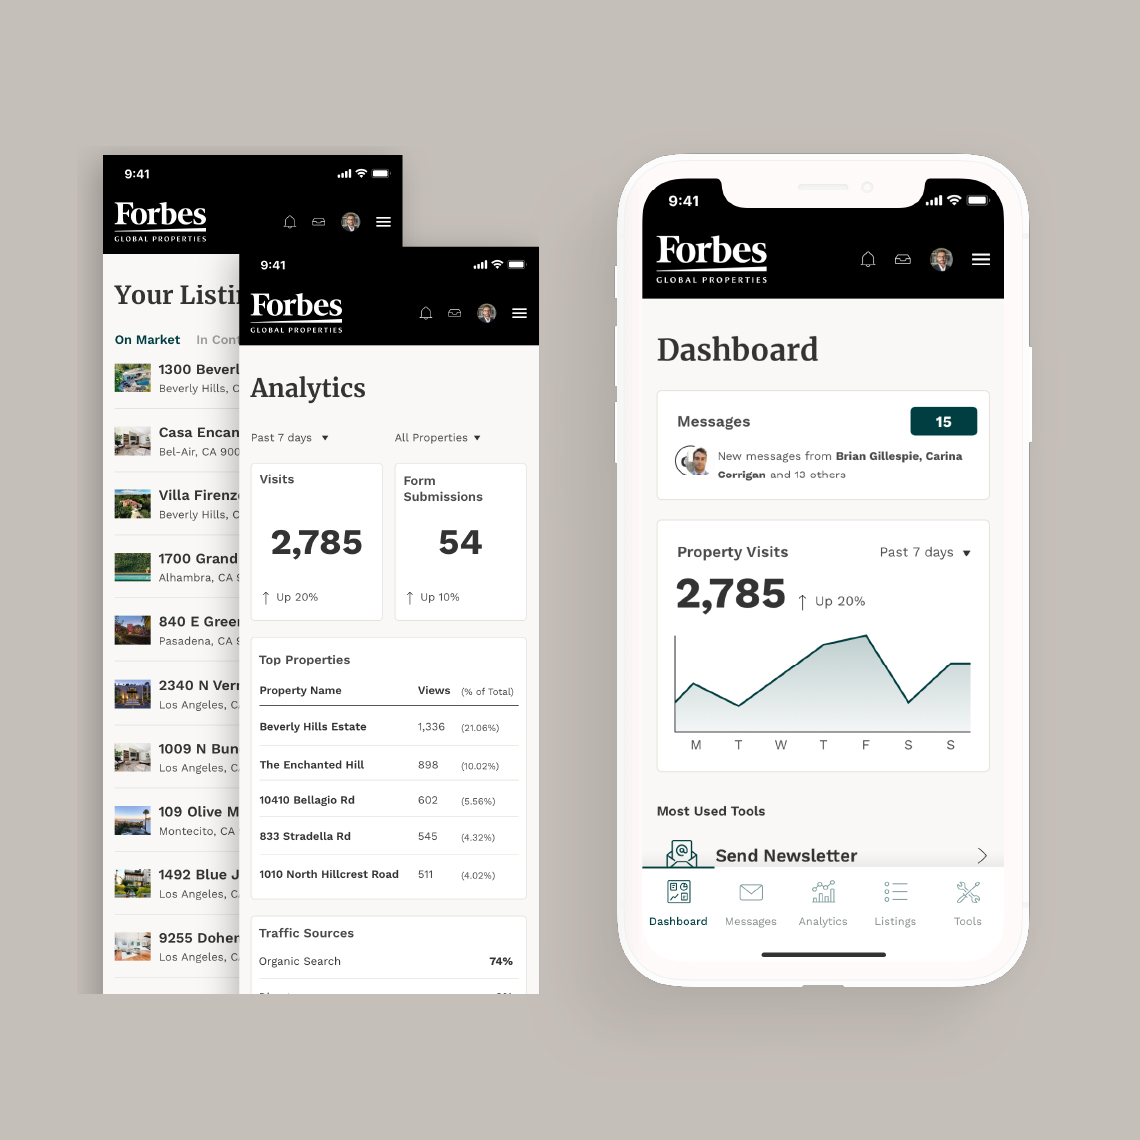 Mobile layout of the website developed for Forbes Global Properties, showing varies types of contents: listing, details and graphics